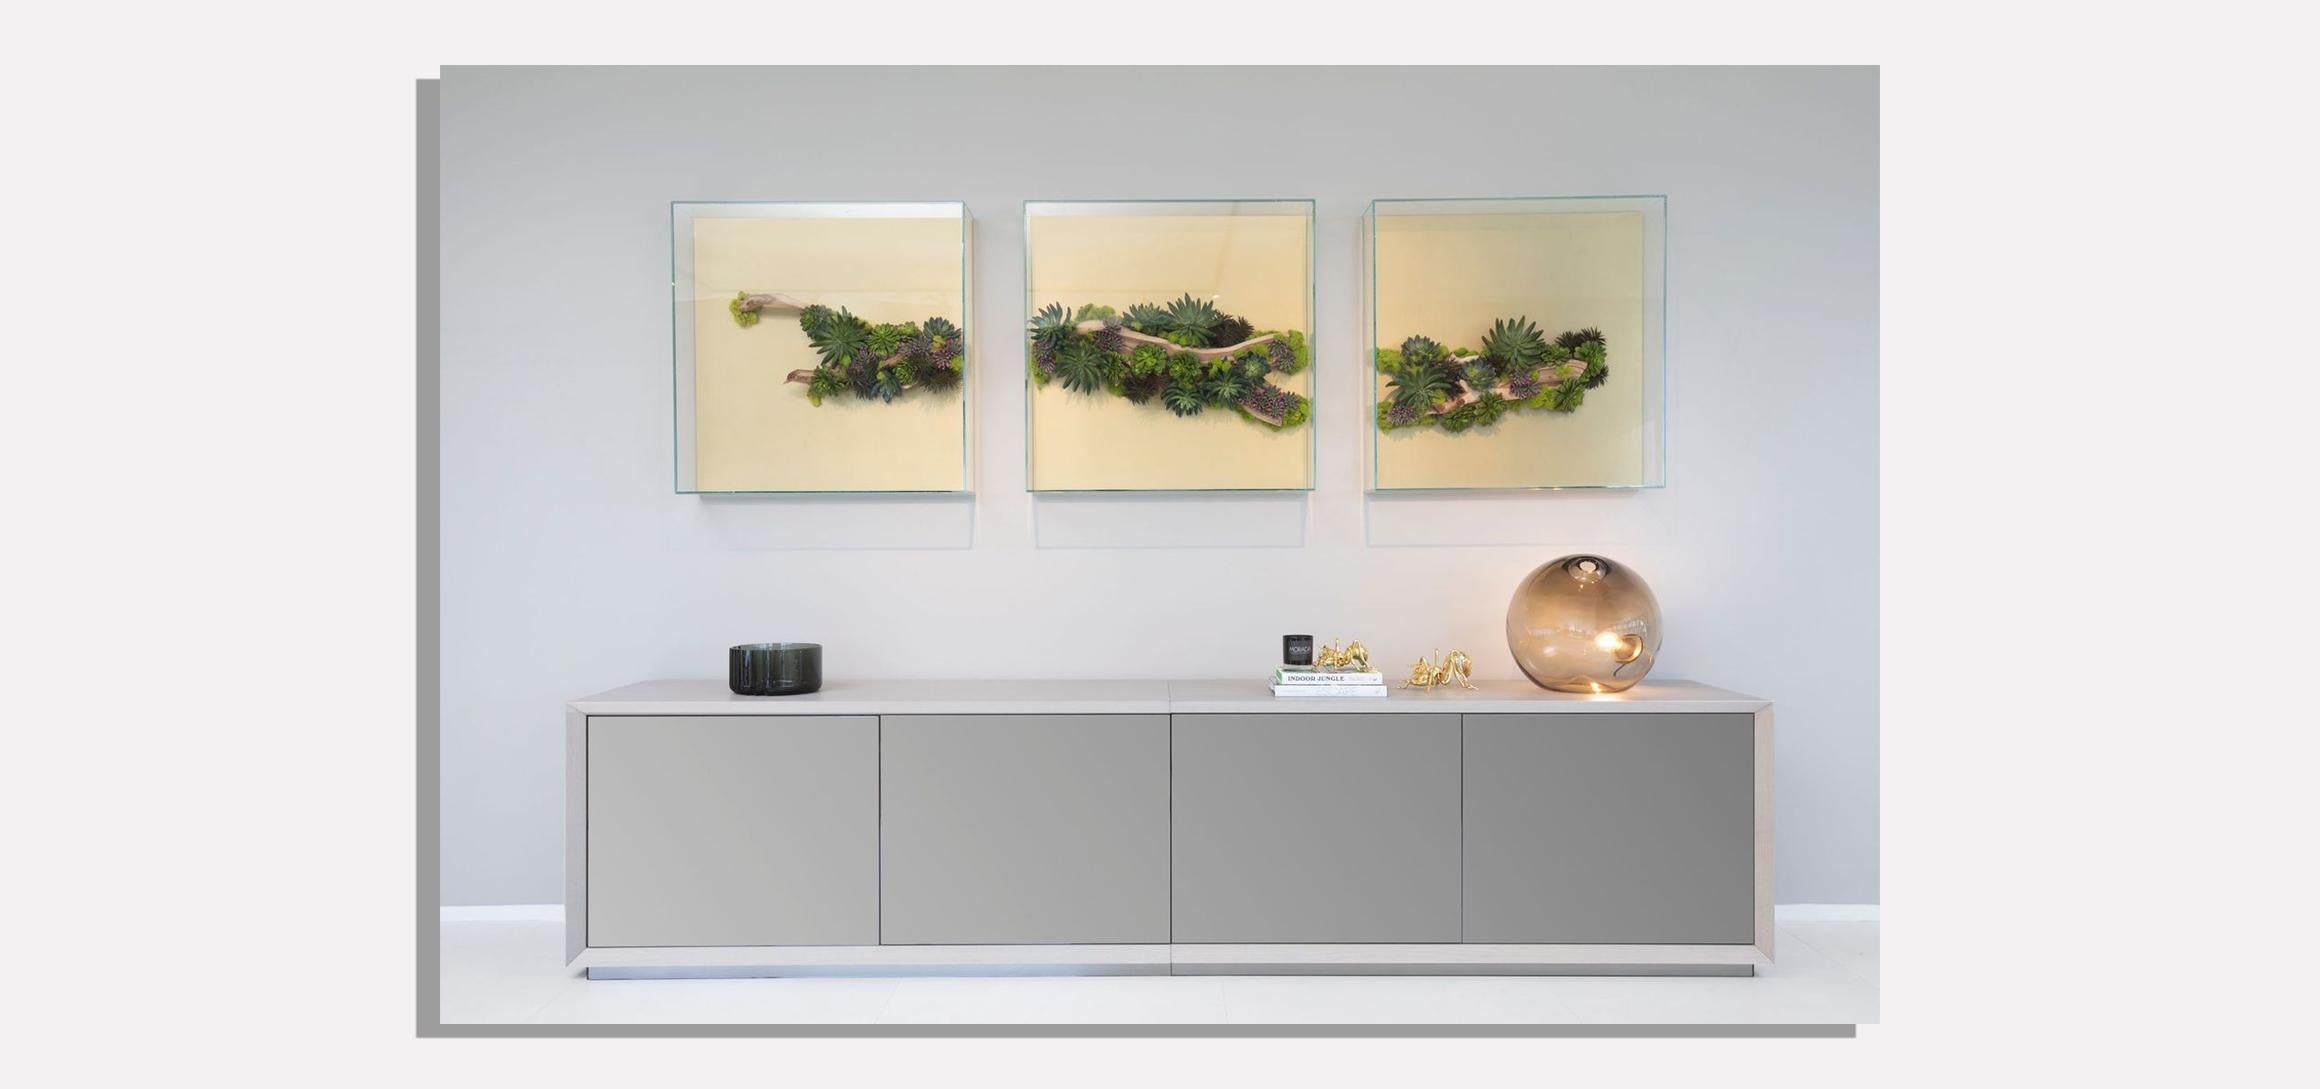 Lush Life is an art work that brings natural elements into any living space without compromising elegance. This dynamic and vibrant piece can completely change the perception of any wall.
 
As shown glass: clear metal: Oro Satinato

Handcrafted